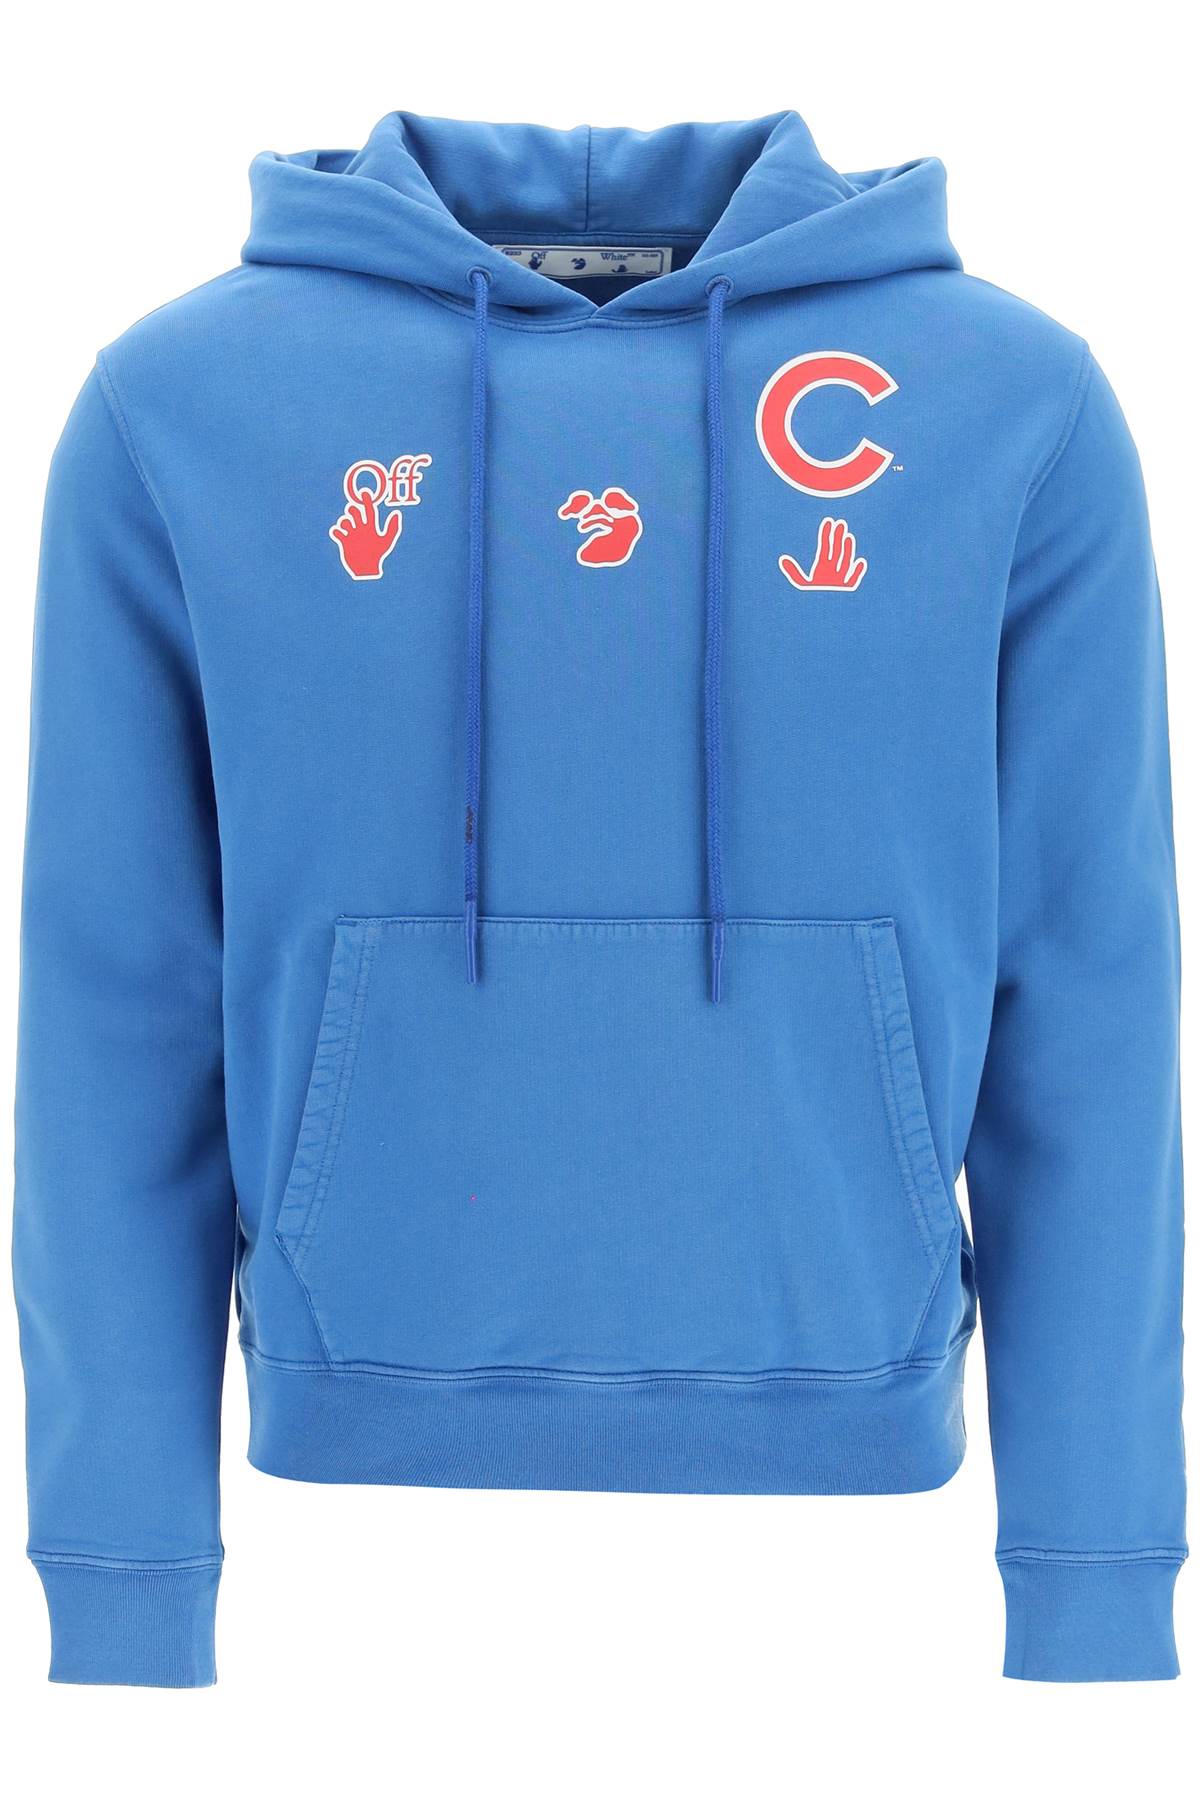 Off-White Chicago Cubs Hoodie X Mlb